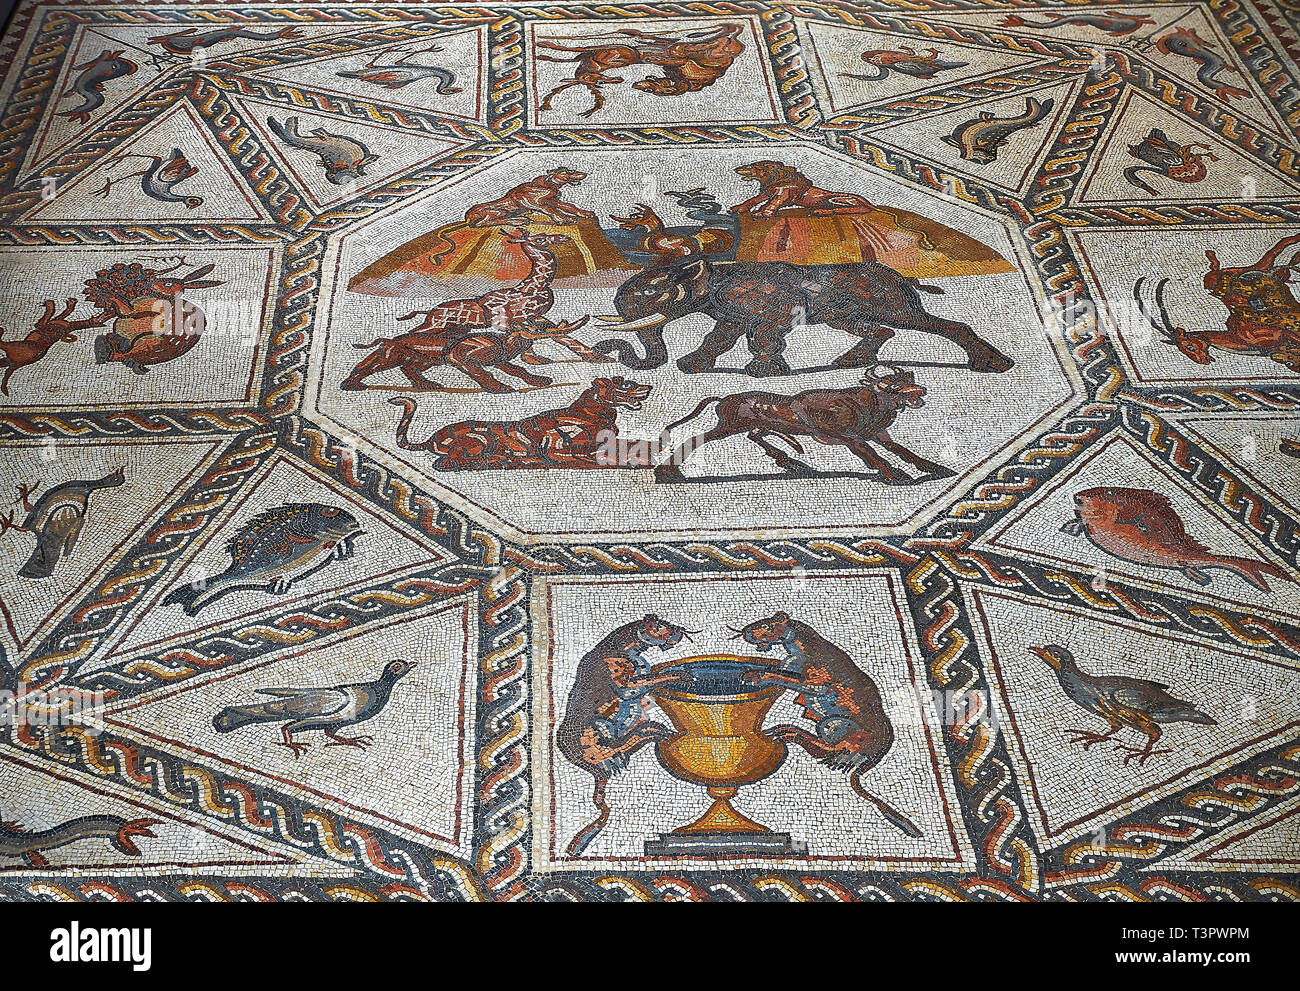 African animals and fish from the 3rd century Roman mosaic villa floor from Lod, near Tel Aviv, Israel. The Roman floor mosaic of Lod is the largest a Stock Photo